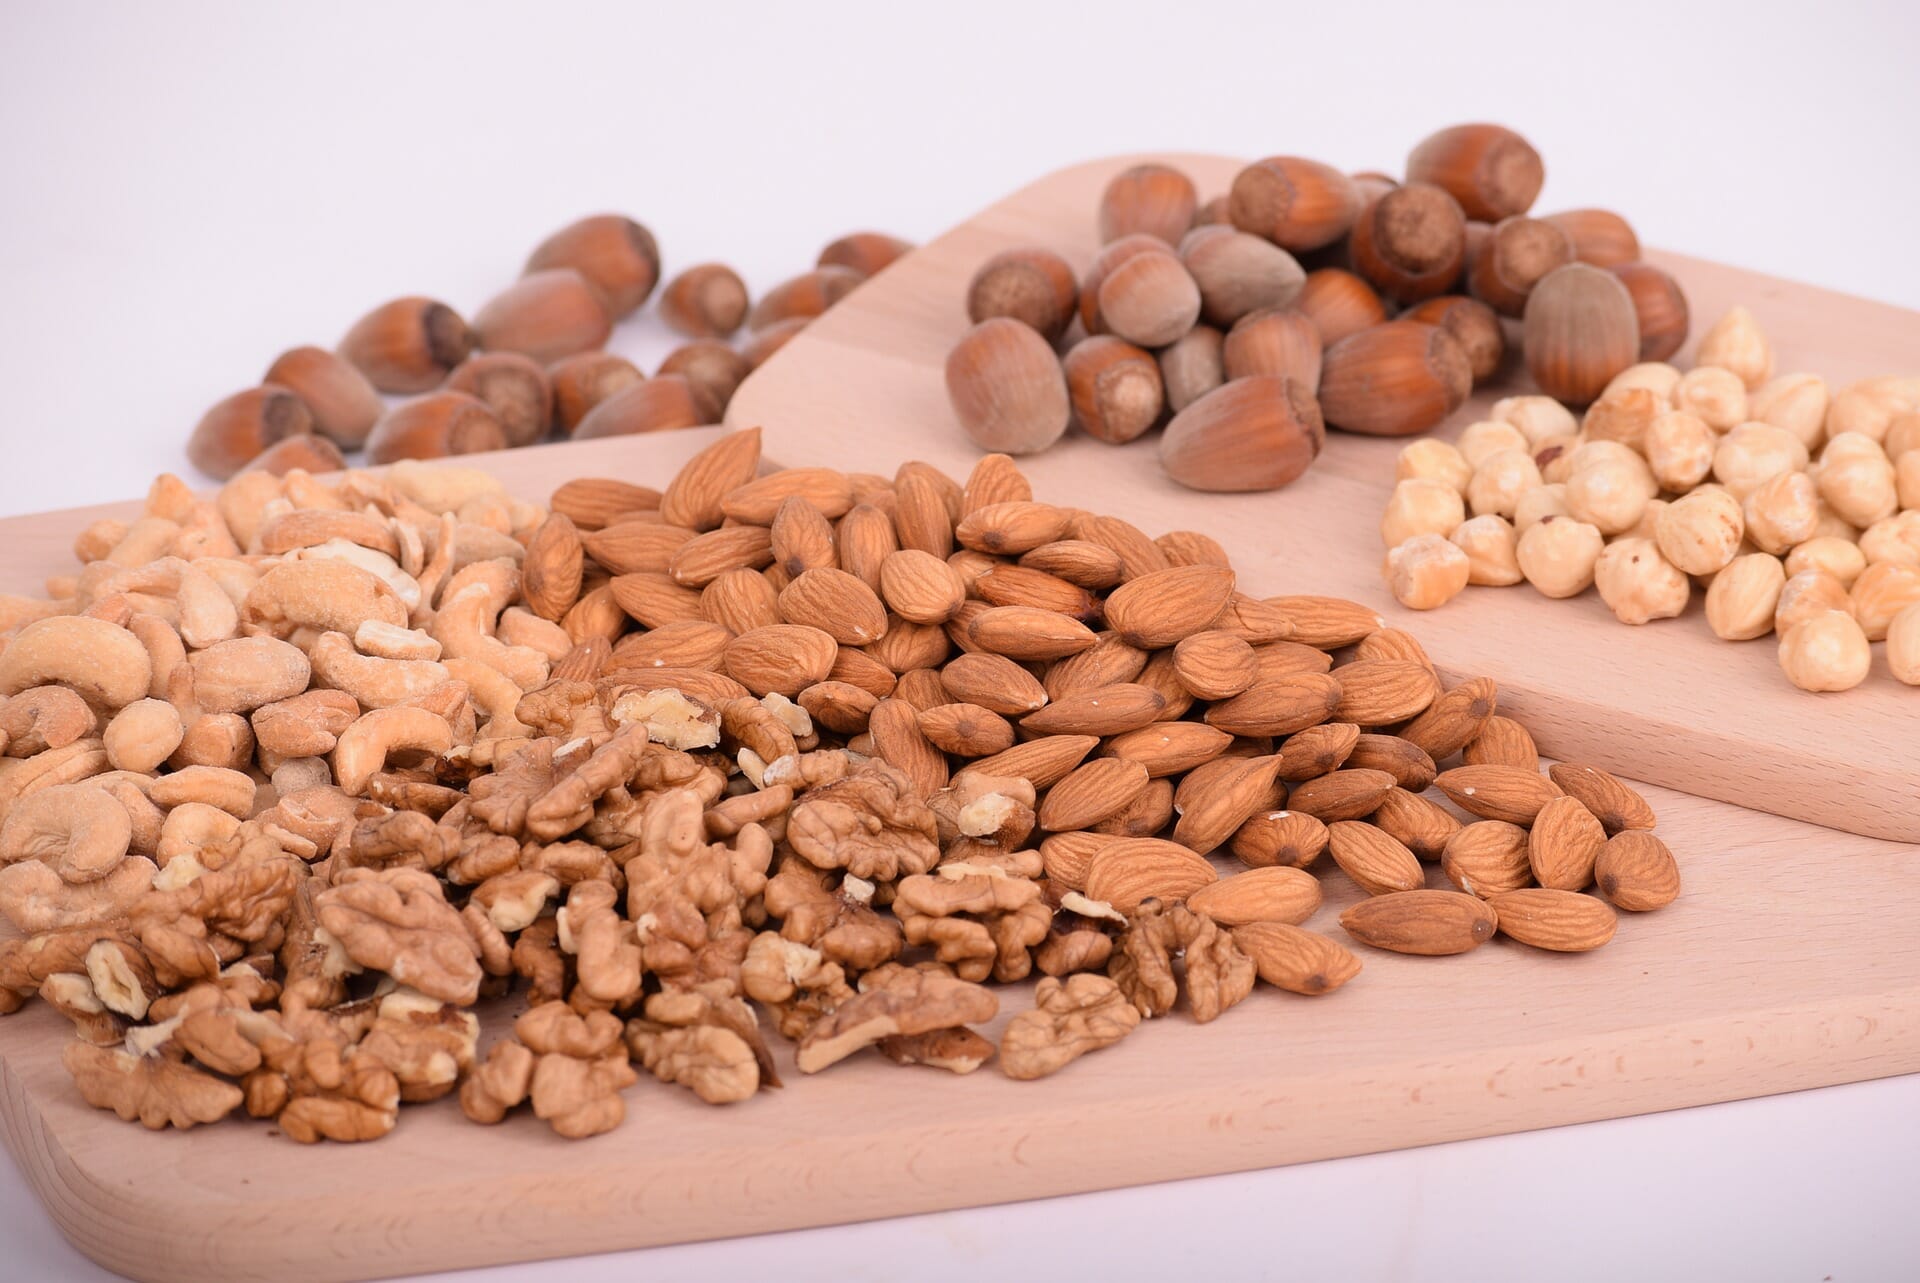 Nuts and seeds have antinutrients